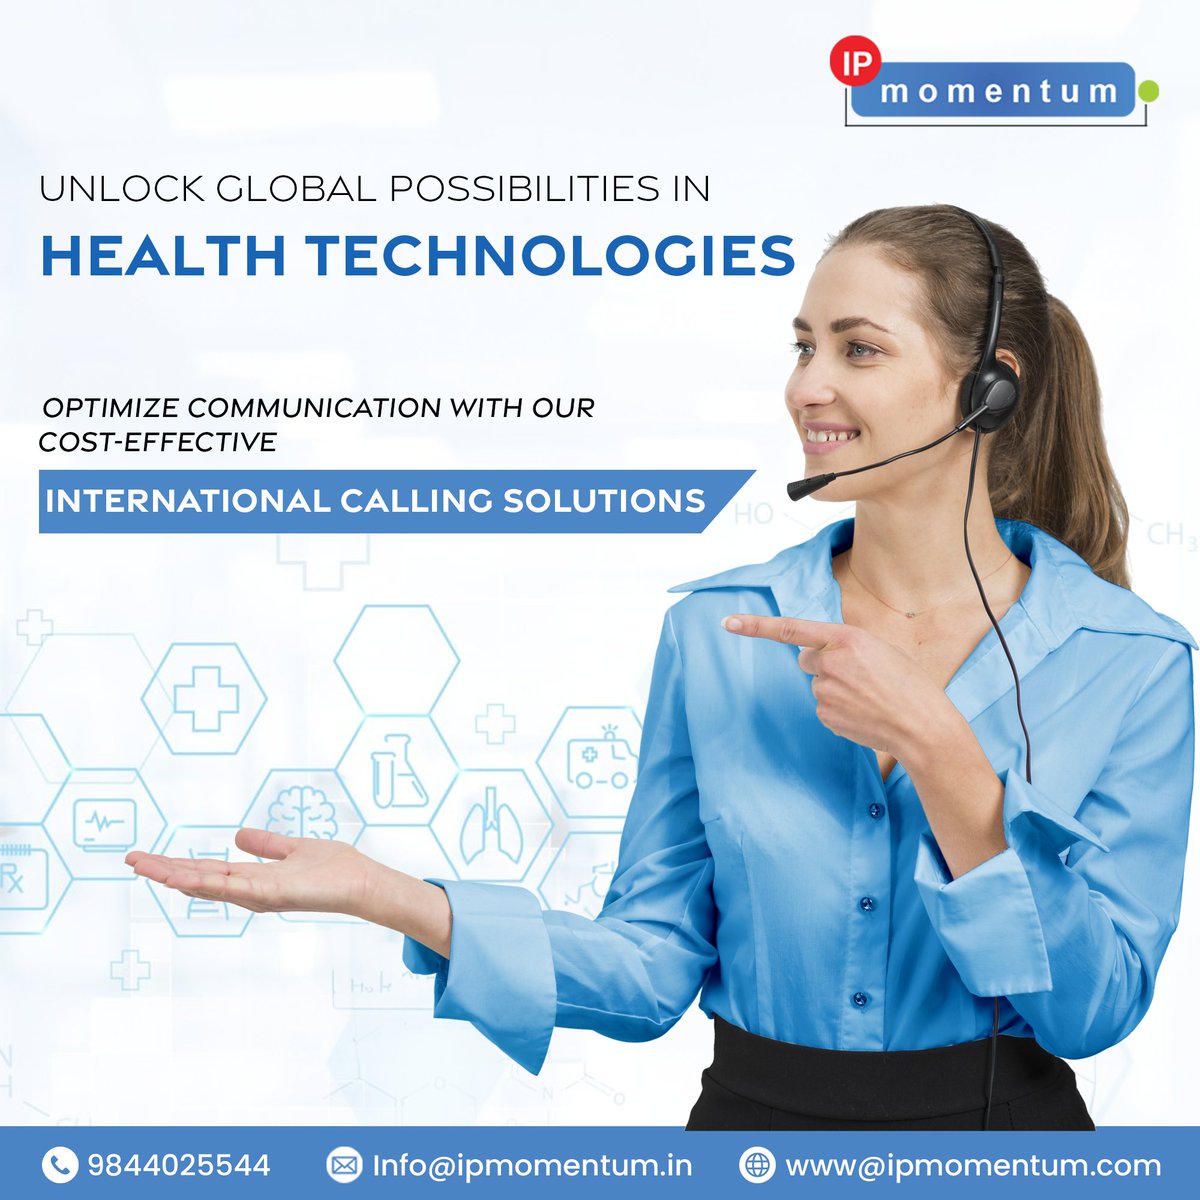 Unlock global possibilities in Health Technologies. Connect with professionals worldwide for innovation. 24/7 support ensures seamless communication. Visit IP Momentum's website at ipmomentum.com for more! #HealthTech #GlobalInnovation #TechSolutions #IPMomentum